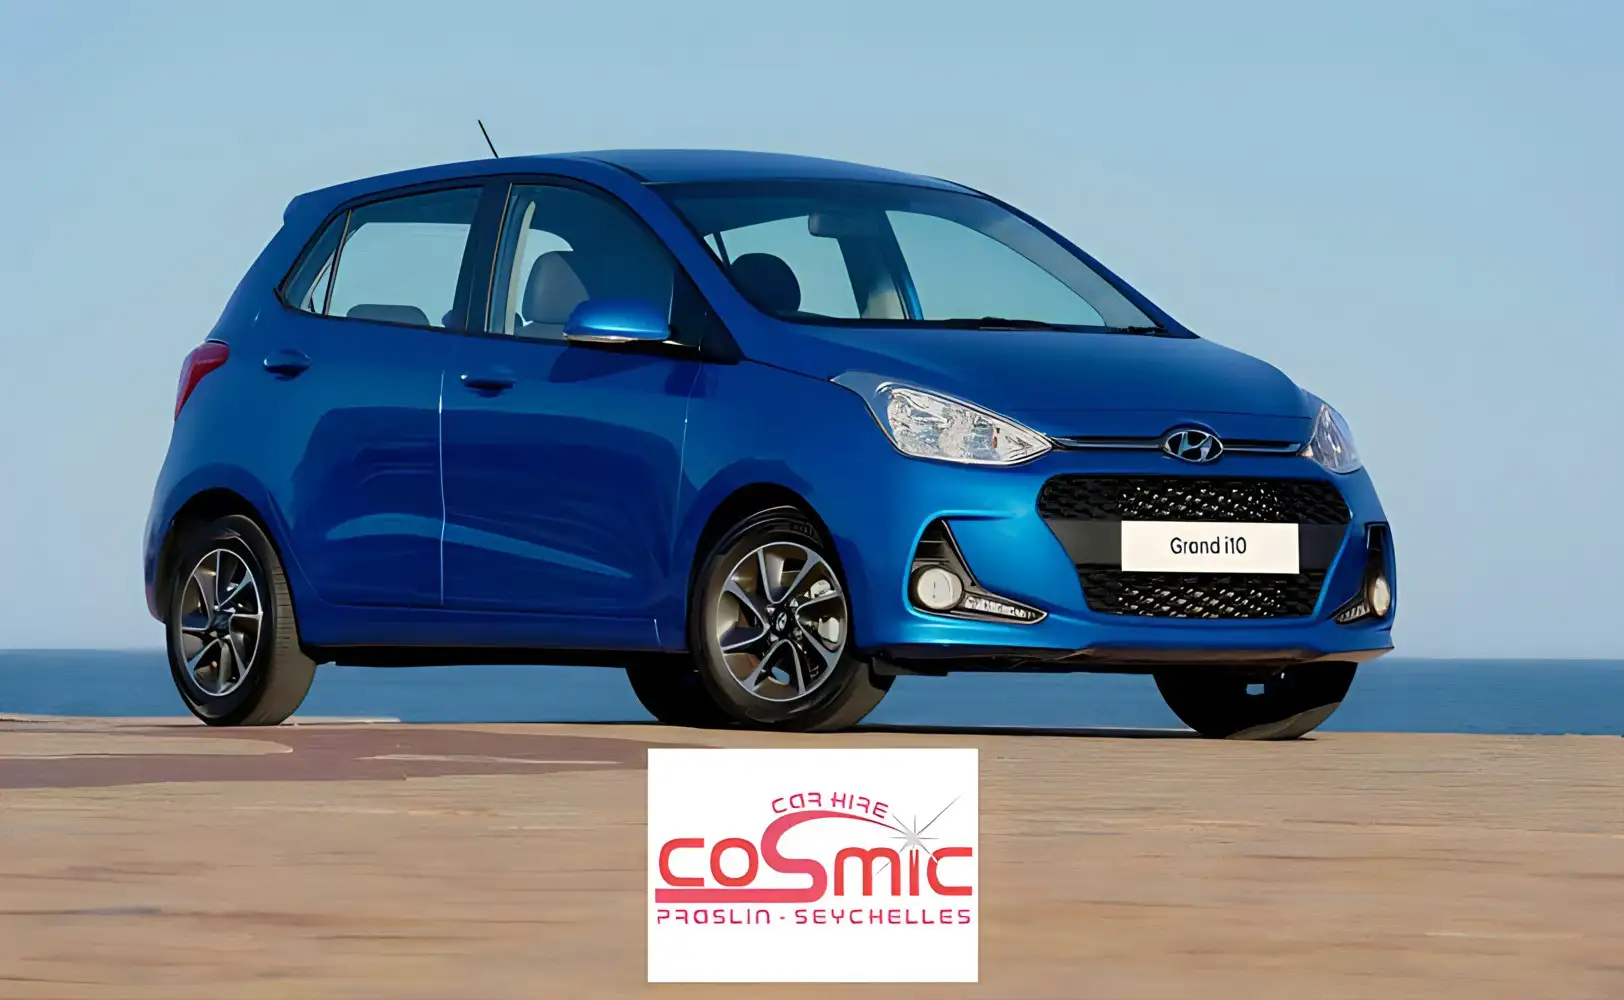 Embark on a memorable journey through Praslin with Cosmic Car Hire, your reliable companion for comfortable cars and top-notch service.